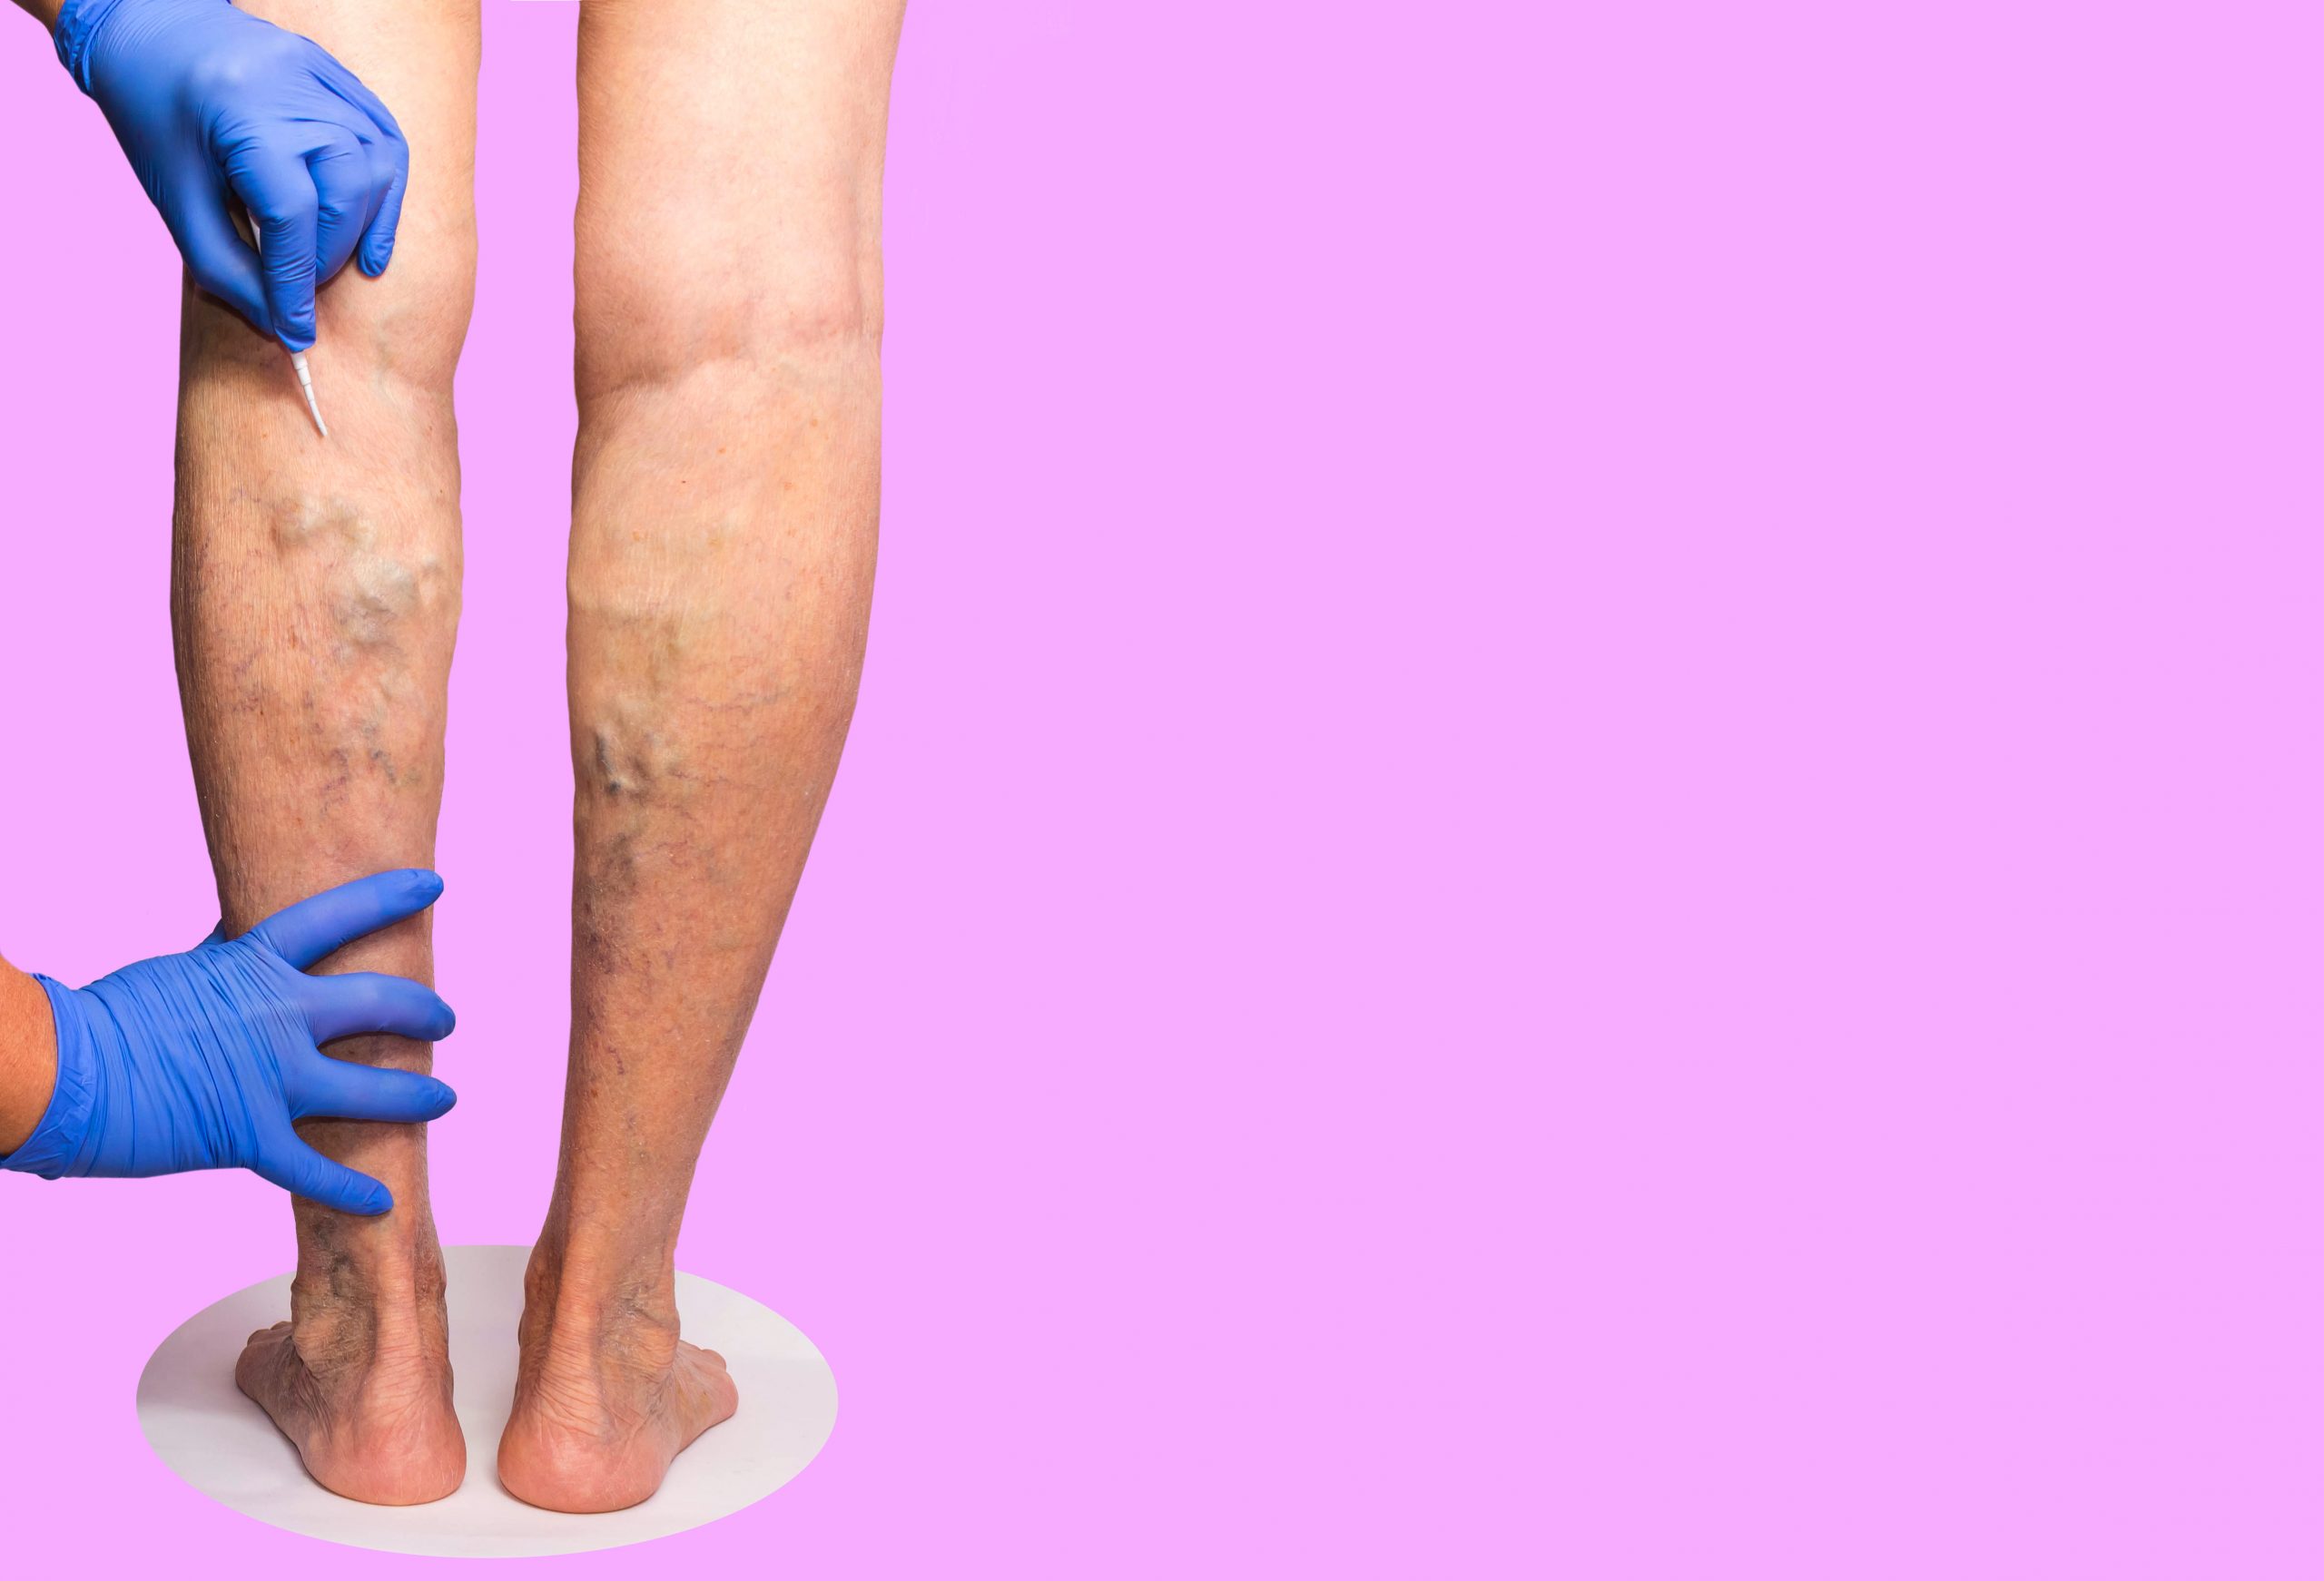 Copy-of-Varicose-Veins-on-legs-with-gloves-hands-shutterstock_1224180379-scaled